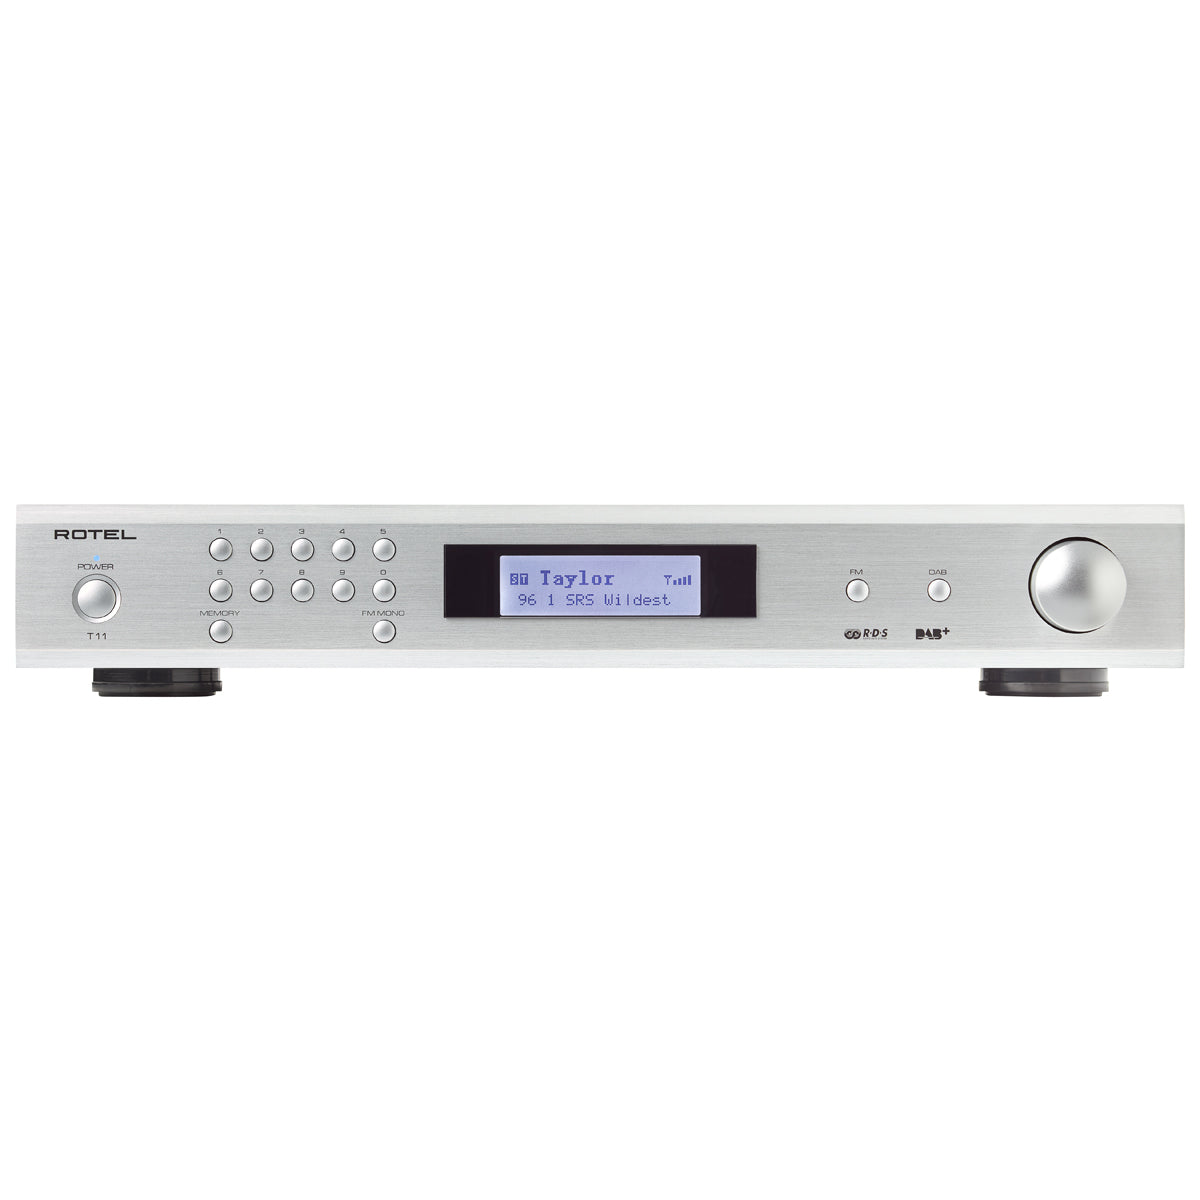 Rotel T11 Digital Radio Tuner - Silver - The Audio Experts